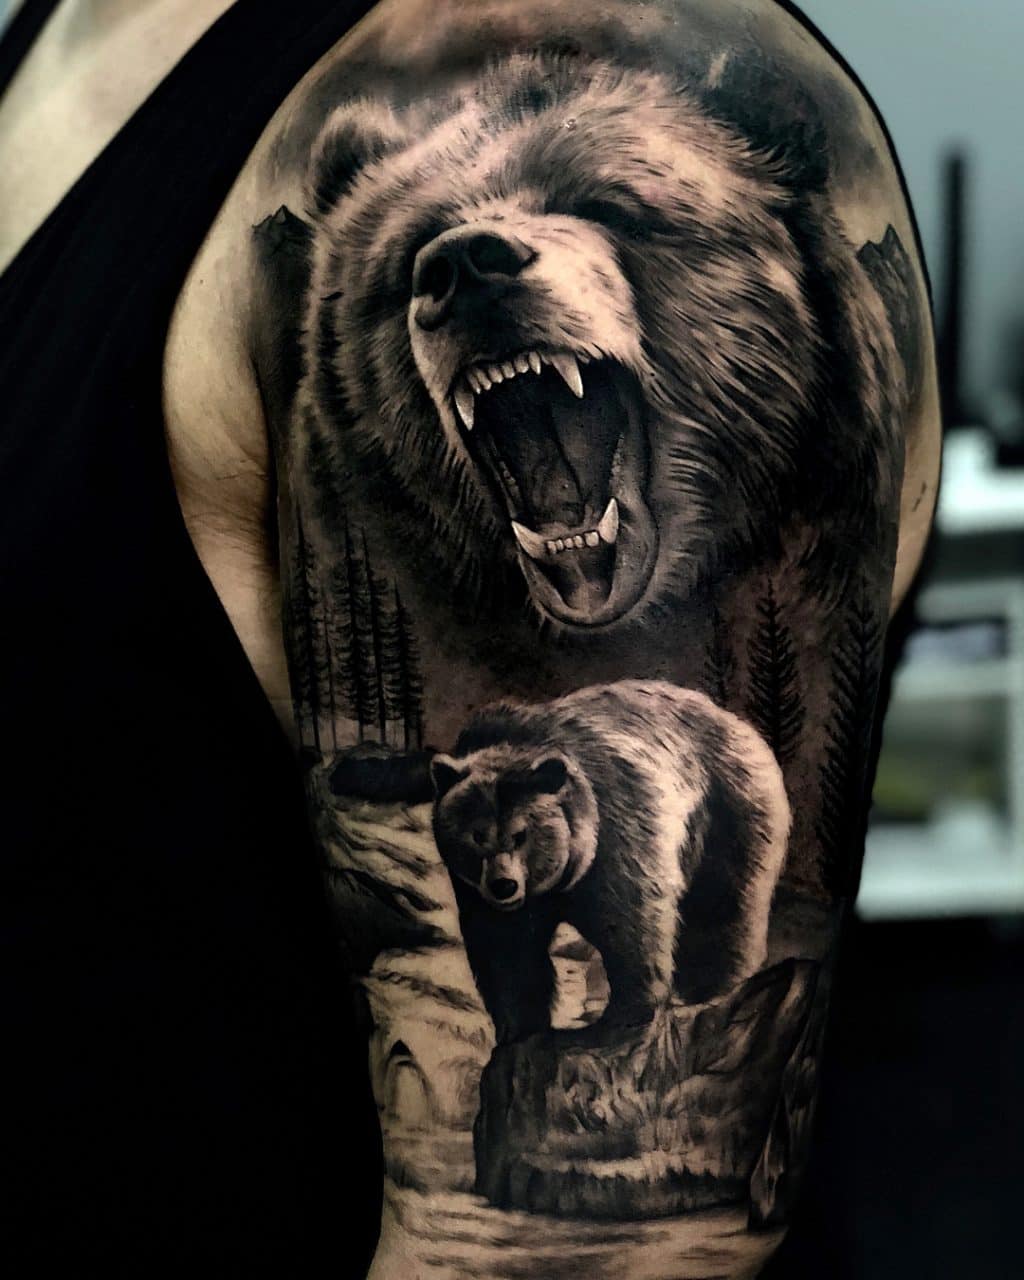 Bear Tattoos Explained Meanings Symbolism More